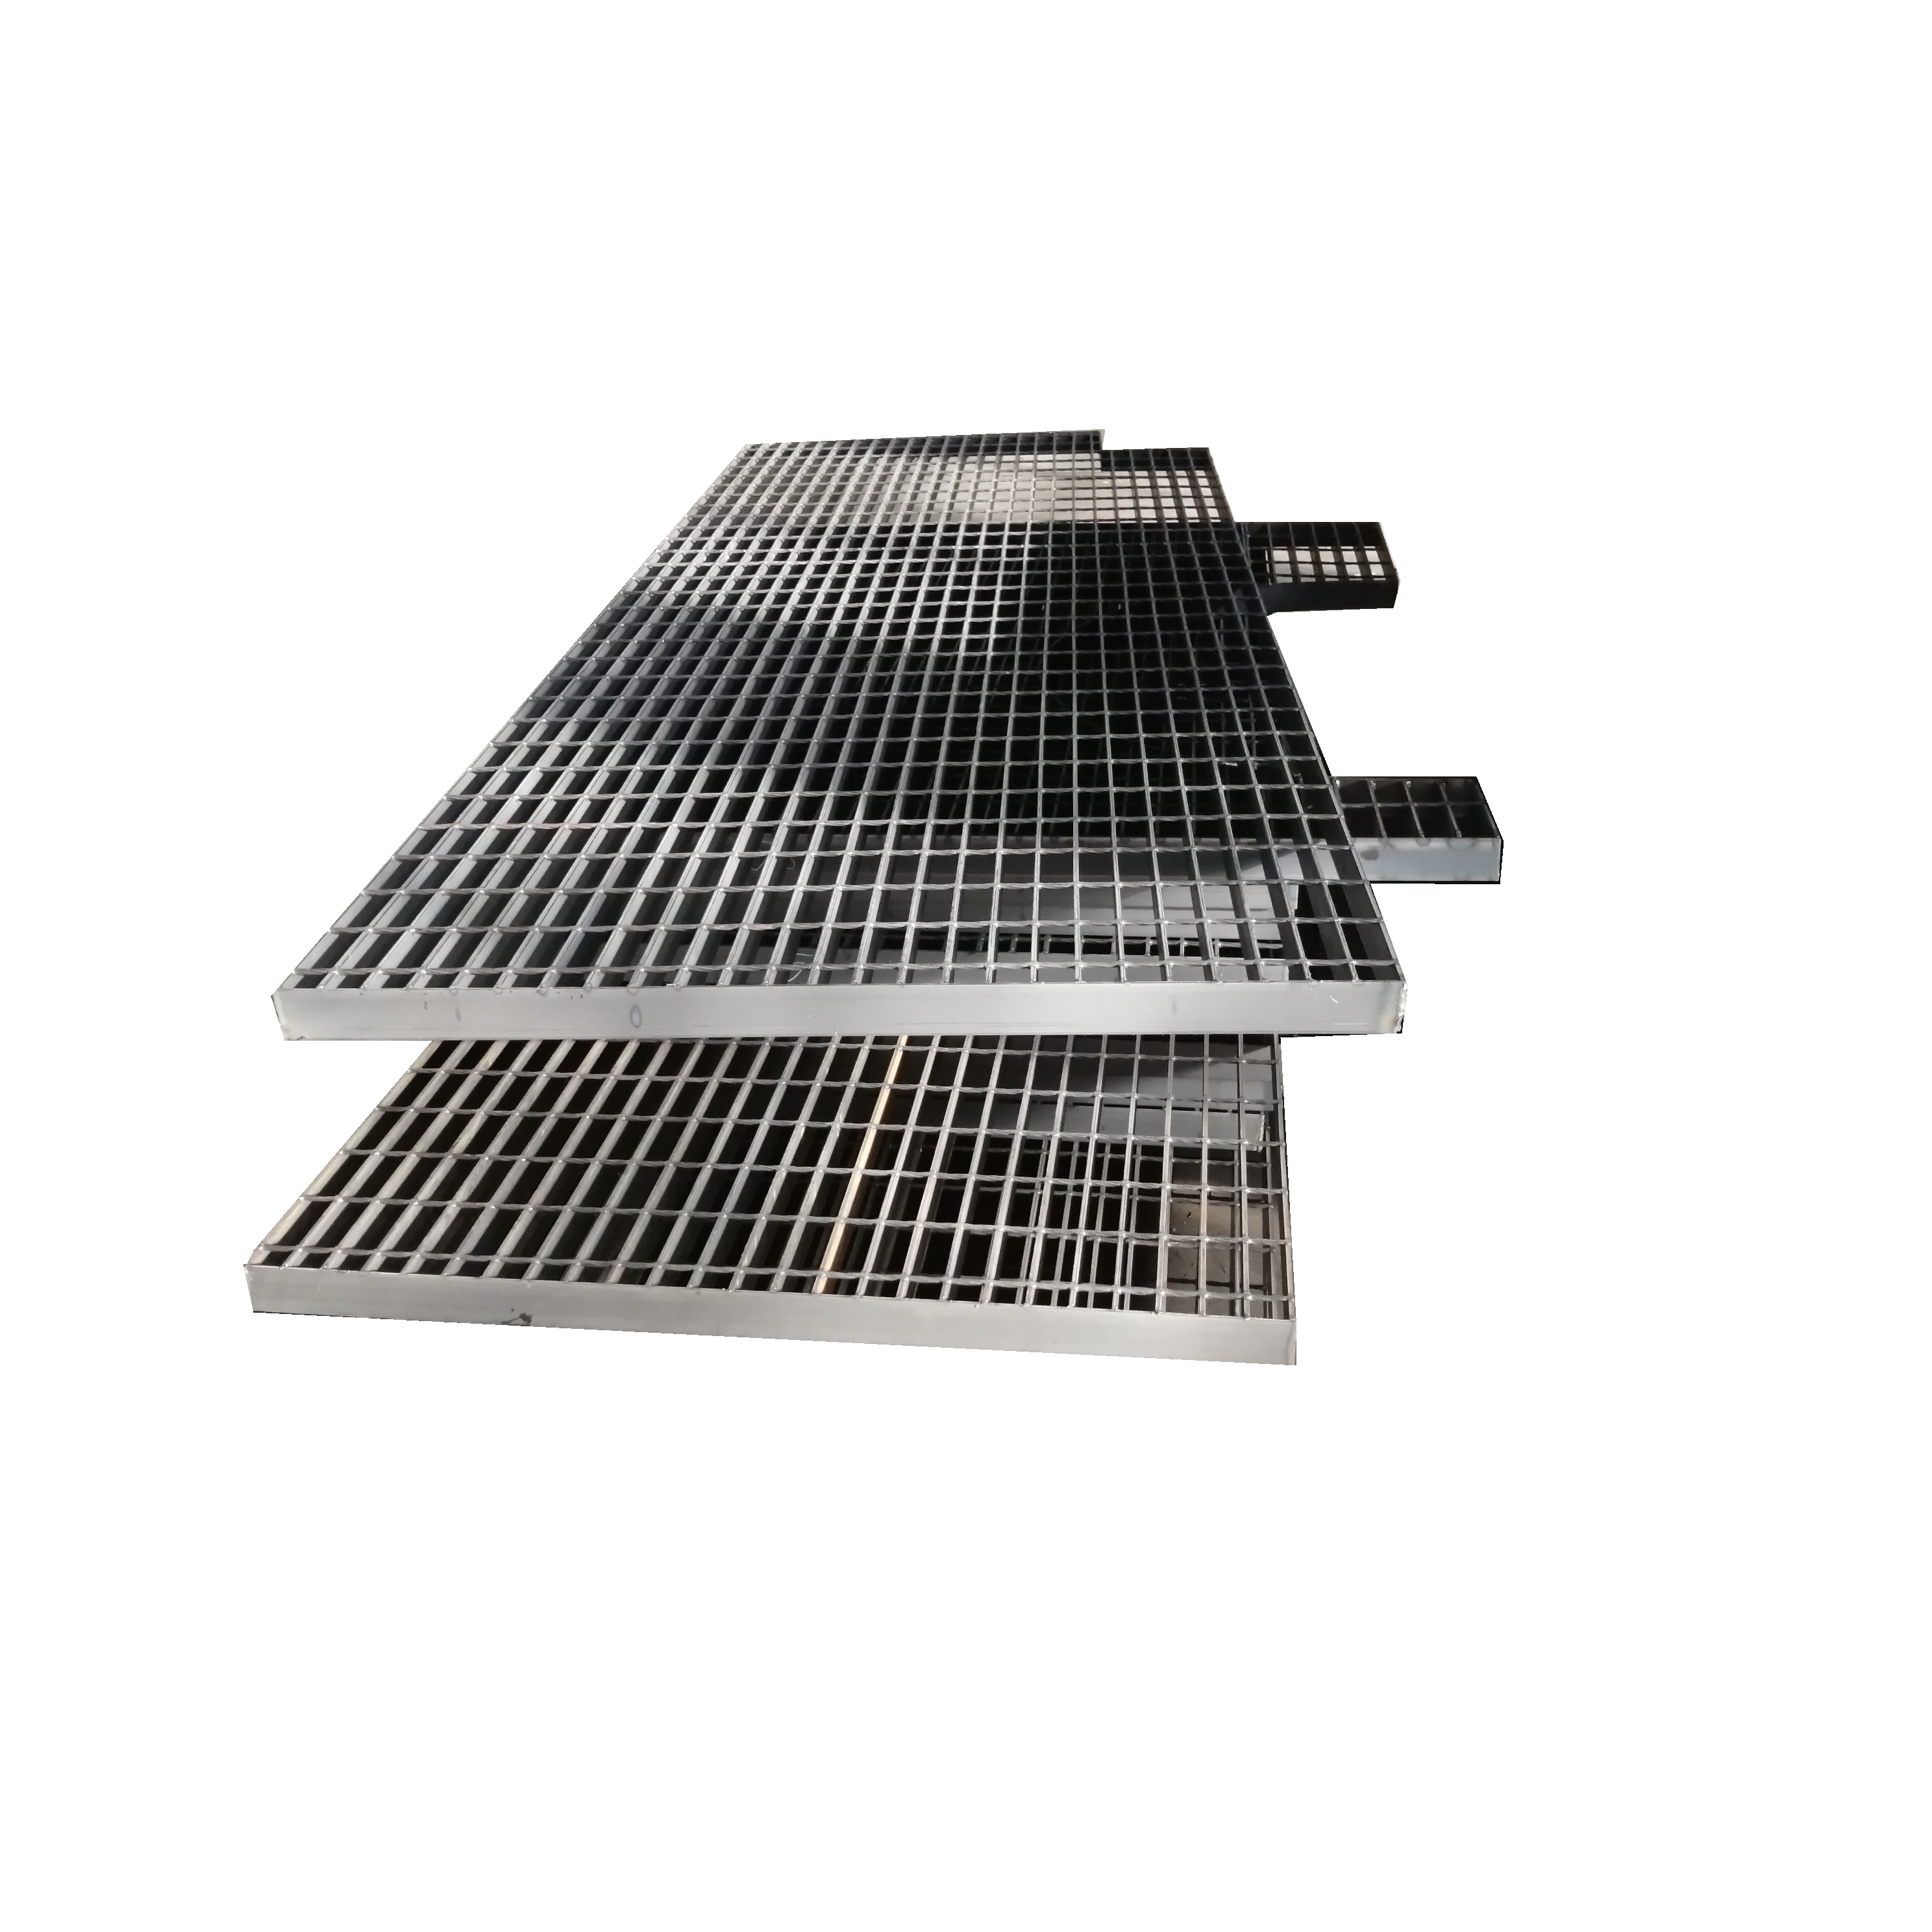 Cheap price Wholesale Light Weight Steel - I 32 Stainless Galvanized Mild Standard Prices Weight Size Steel Grating  – Xiantang